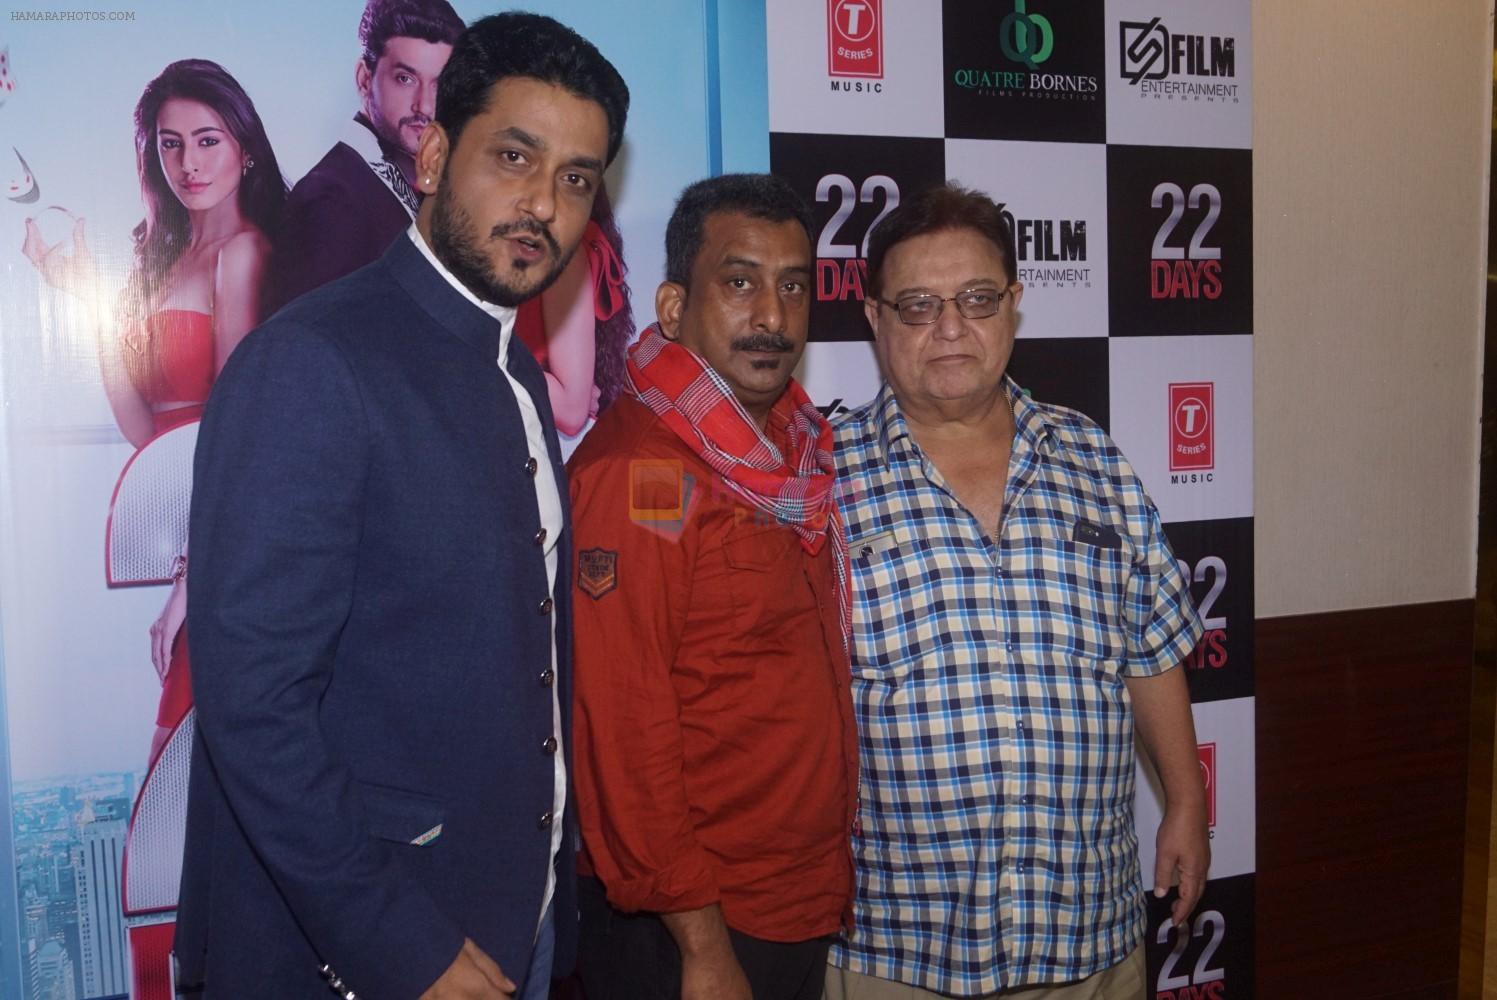 Shivam Tiwari, Hemant Pandey at the Trailer Launch Of Film 22 Days on 24th July 2018